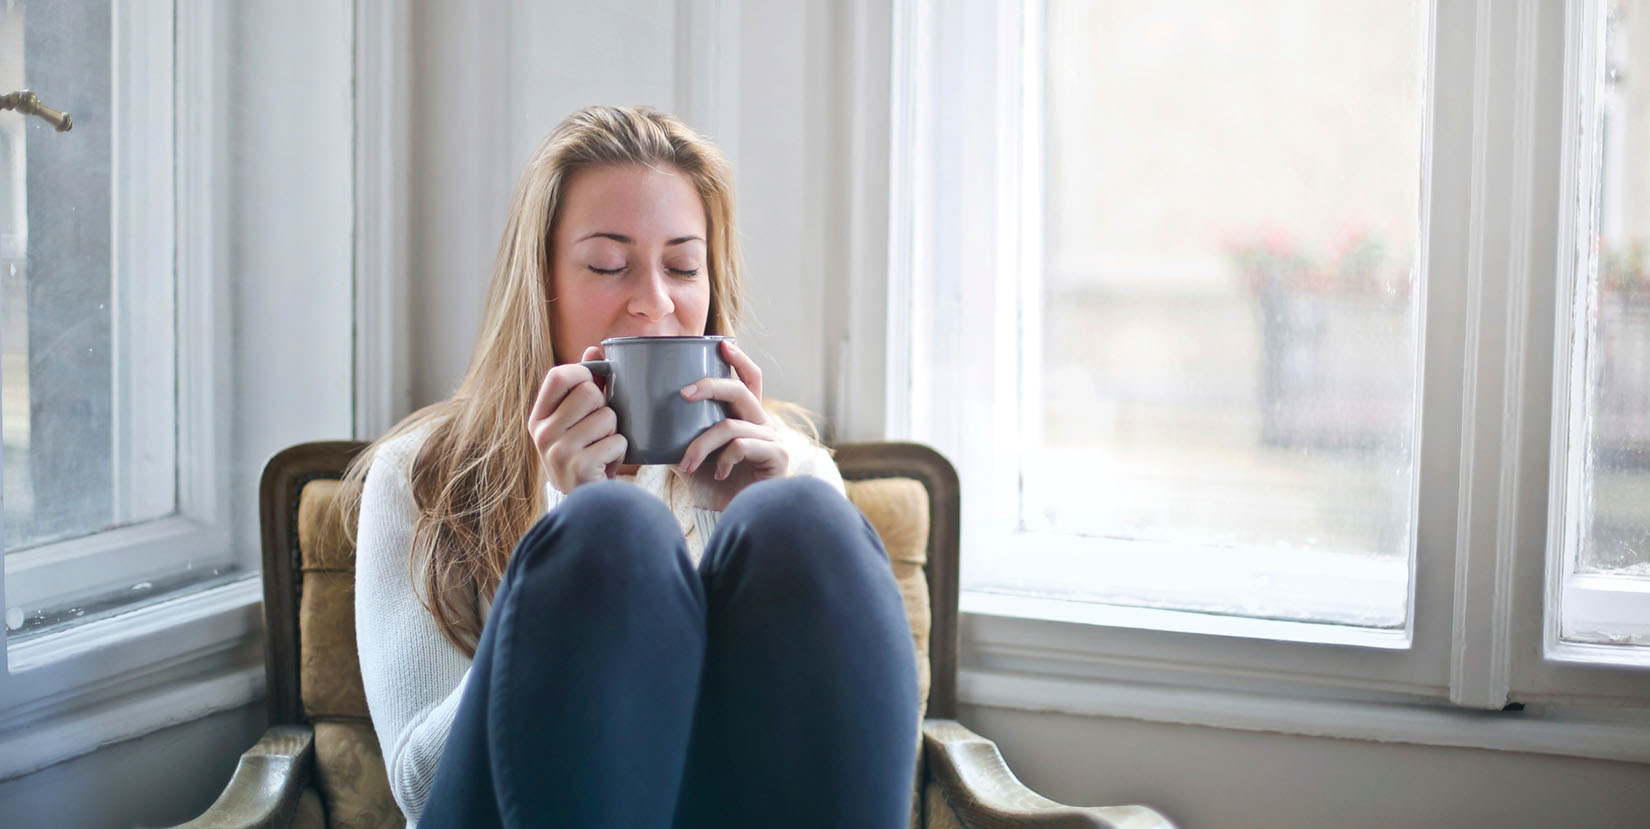 Woman sitting, holding cup - Many of us now have more time to sit and ruminate in our anxiety - how can we stay present and keep ourselves less stressed during this time?